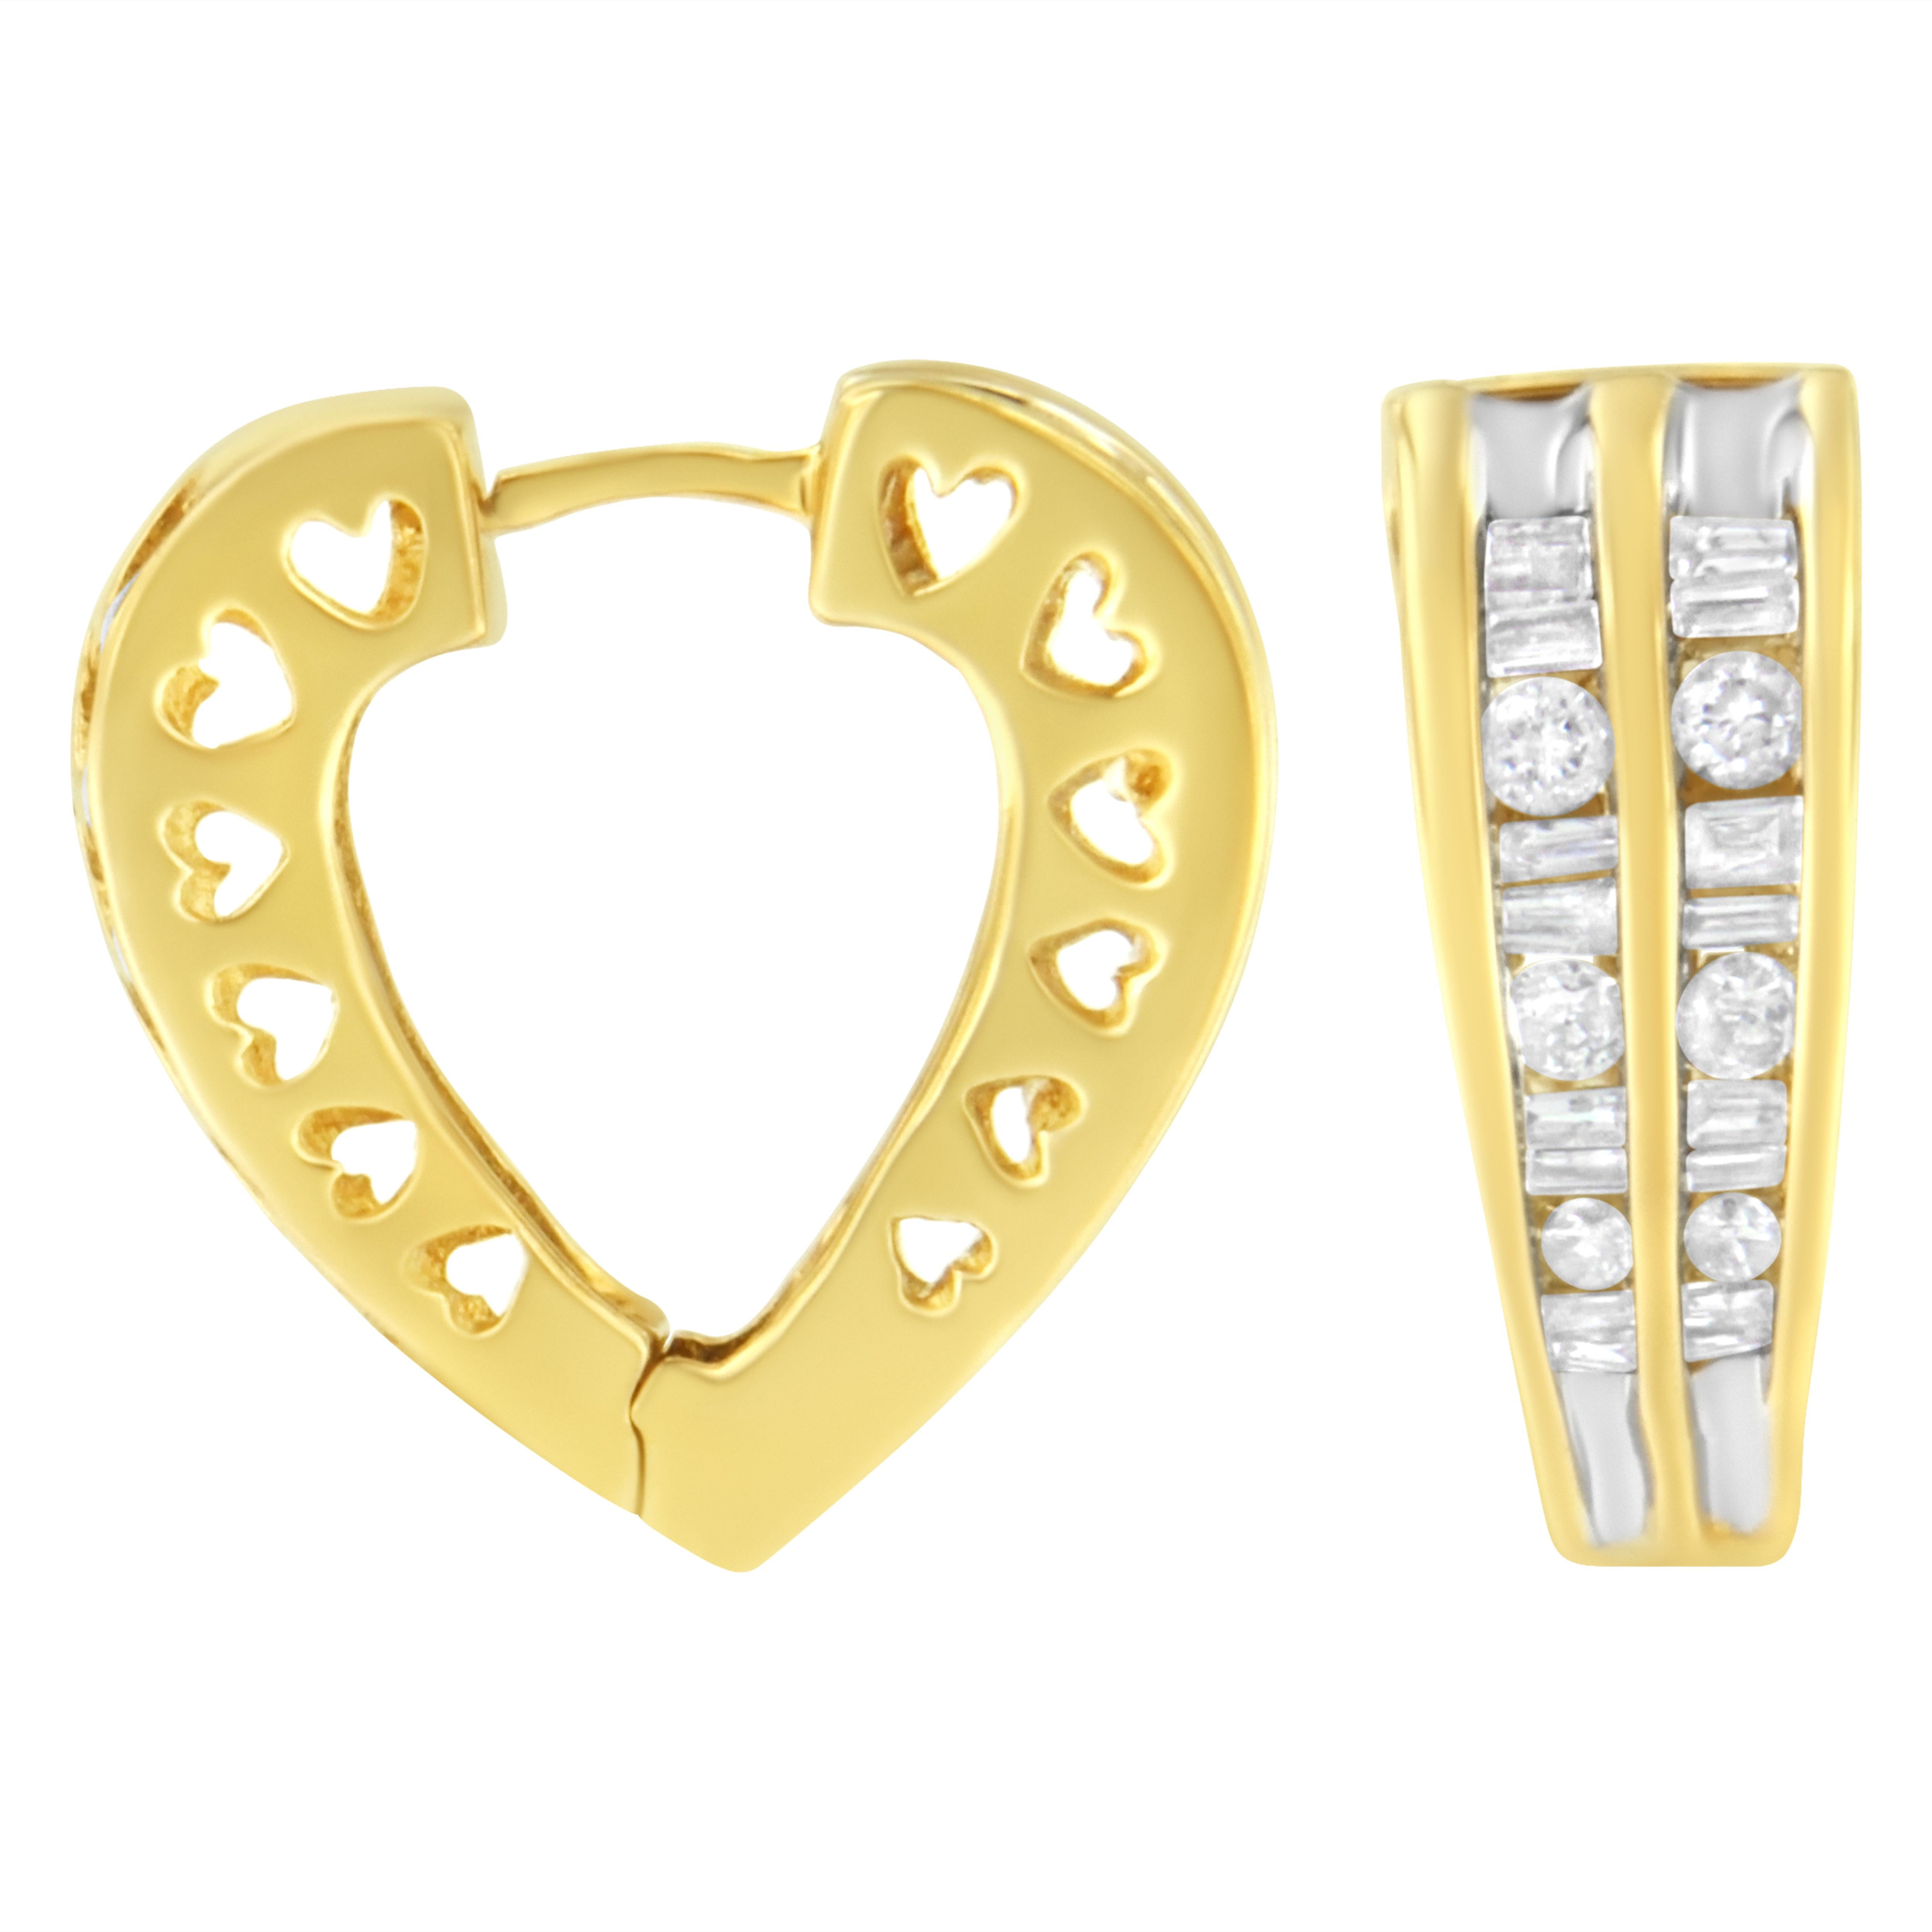 These petite and trendy diamond huggy earrings are the perfect gift for any loved one. Created in 14k yellow and white gold, this beautiful piece has heart-shaped designs etched into it's base. With a total diamond weight of 1 ct., these hoops